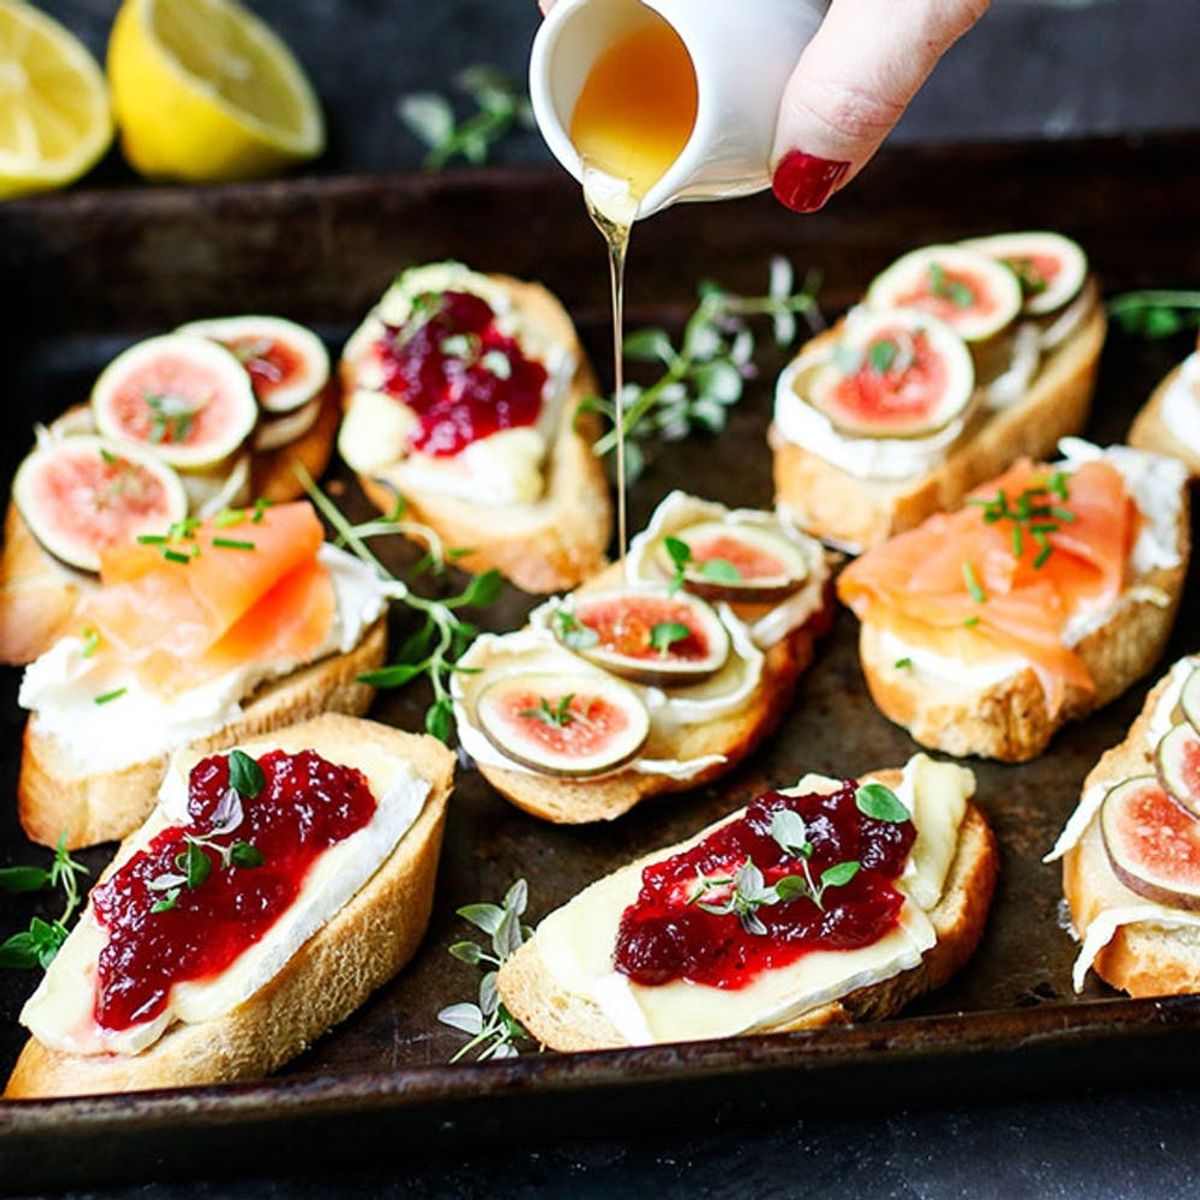 Your Book Club Will Love This Easy but Decadent Crostini Recipe